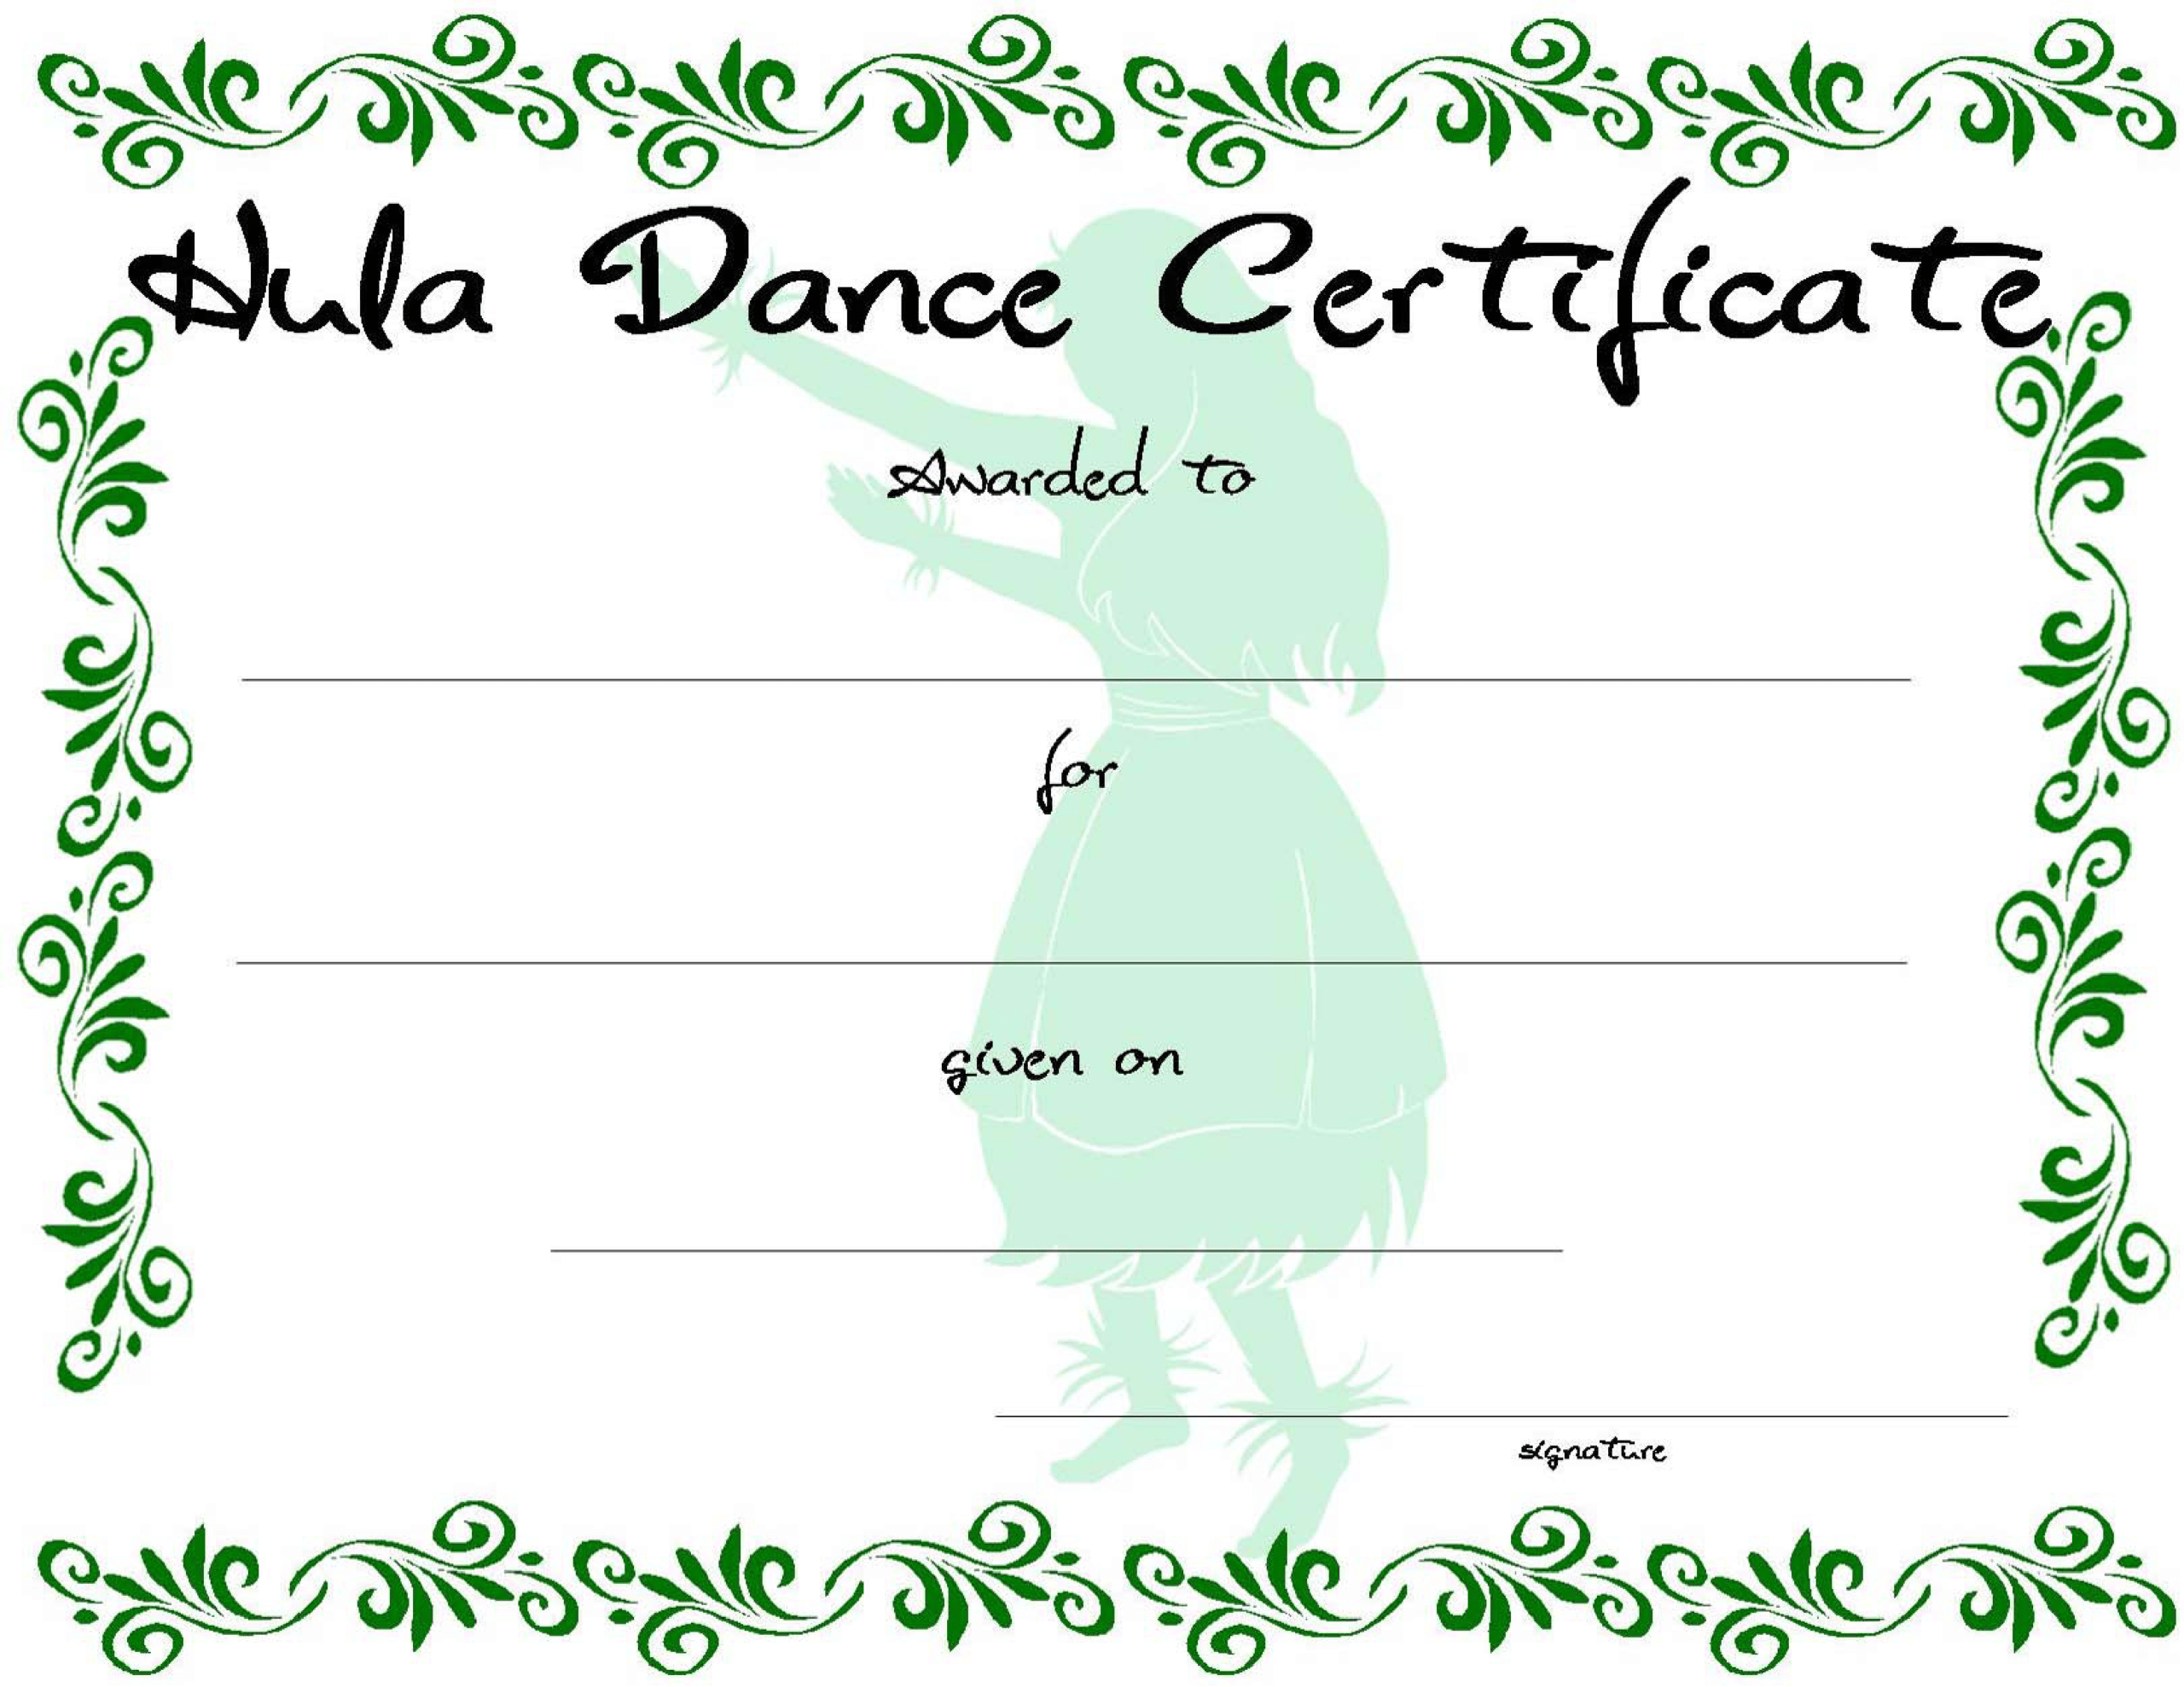 Dance Certificate | Templates At Allbusinesstemplates Throughout Dance Certificate Template